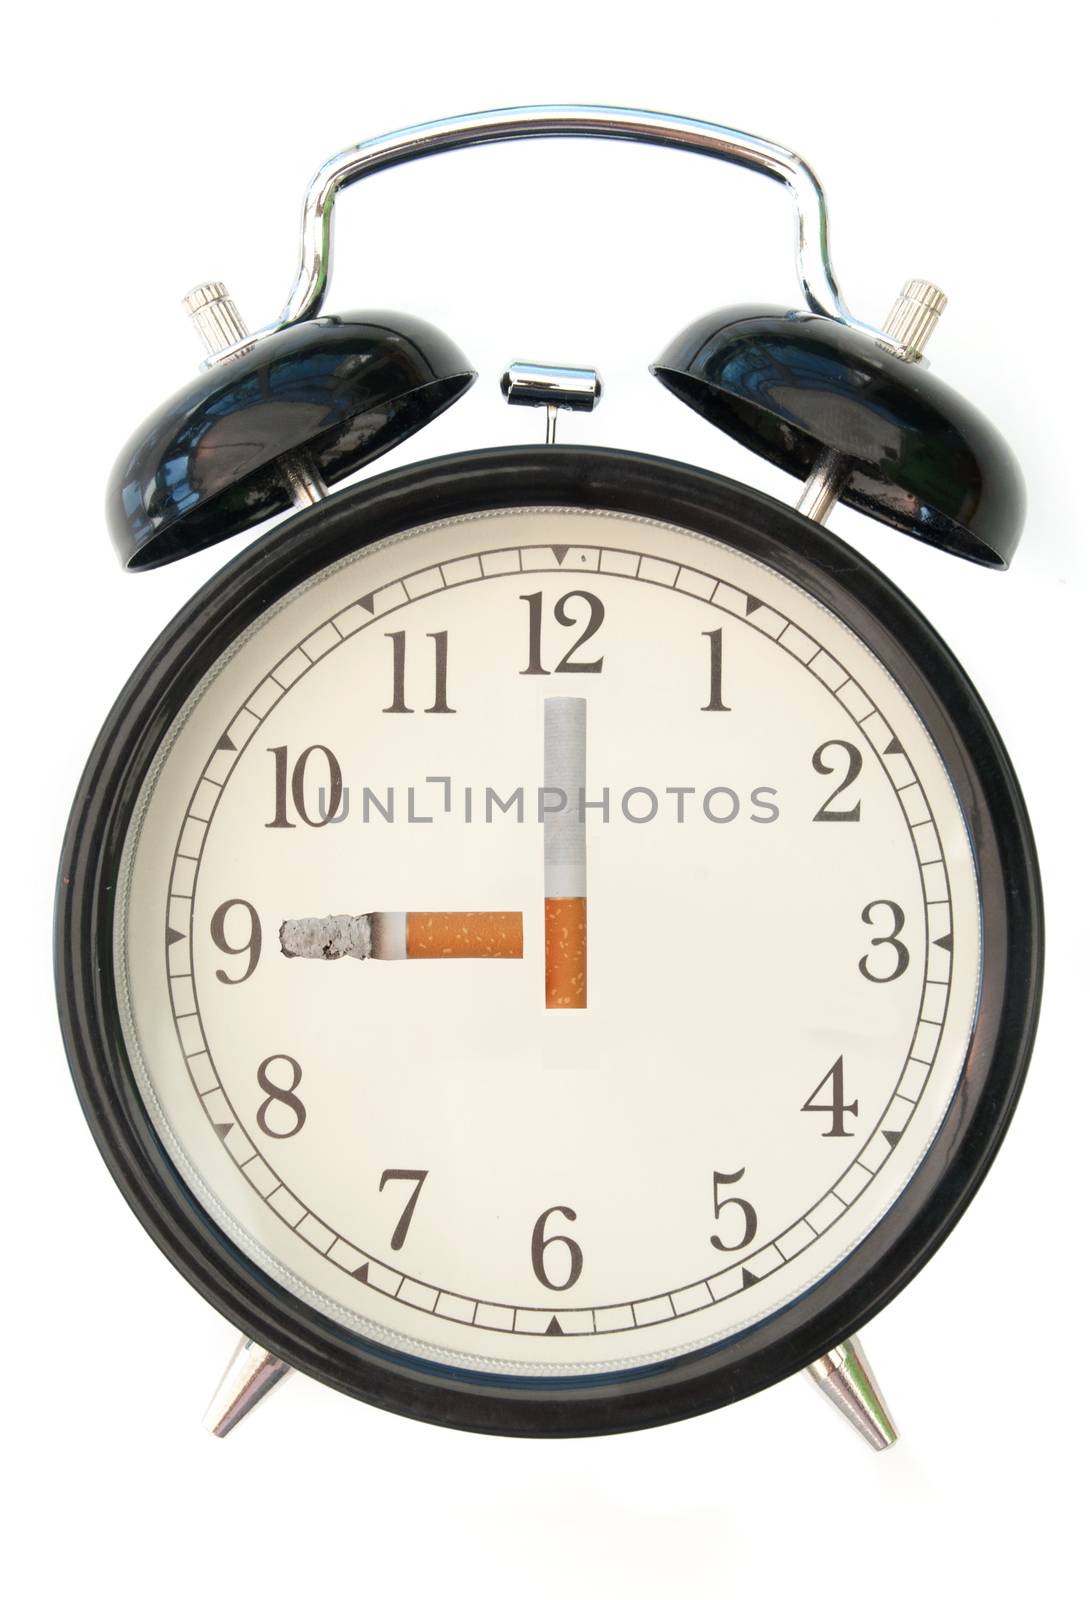 Cigarette hour and minute hands on an alarm clock symbolising 'time to quit' or a smoking habit  